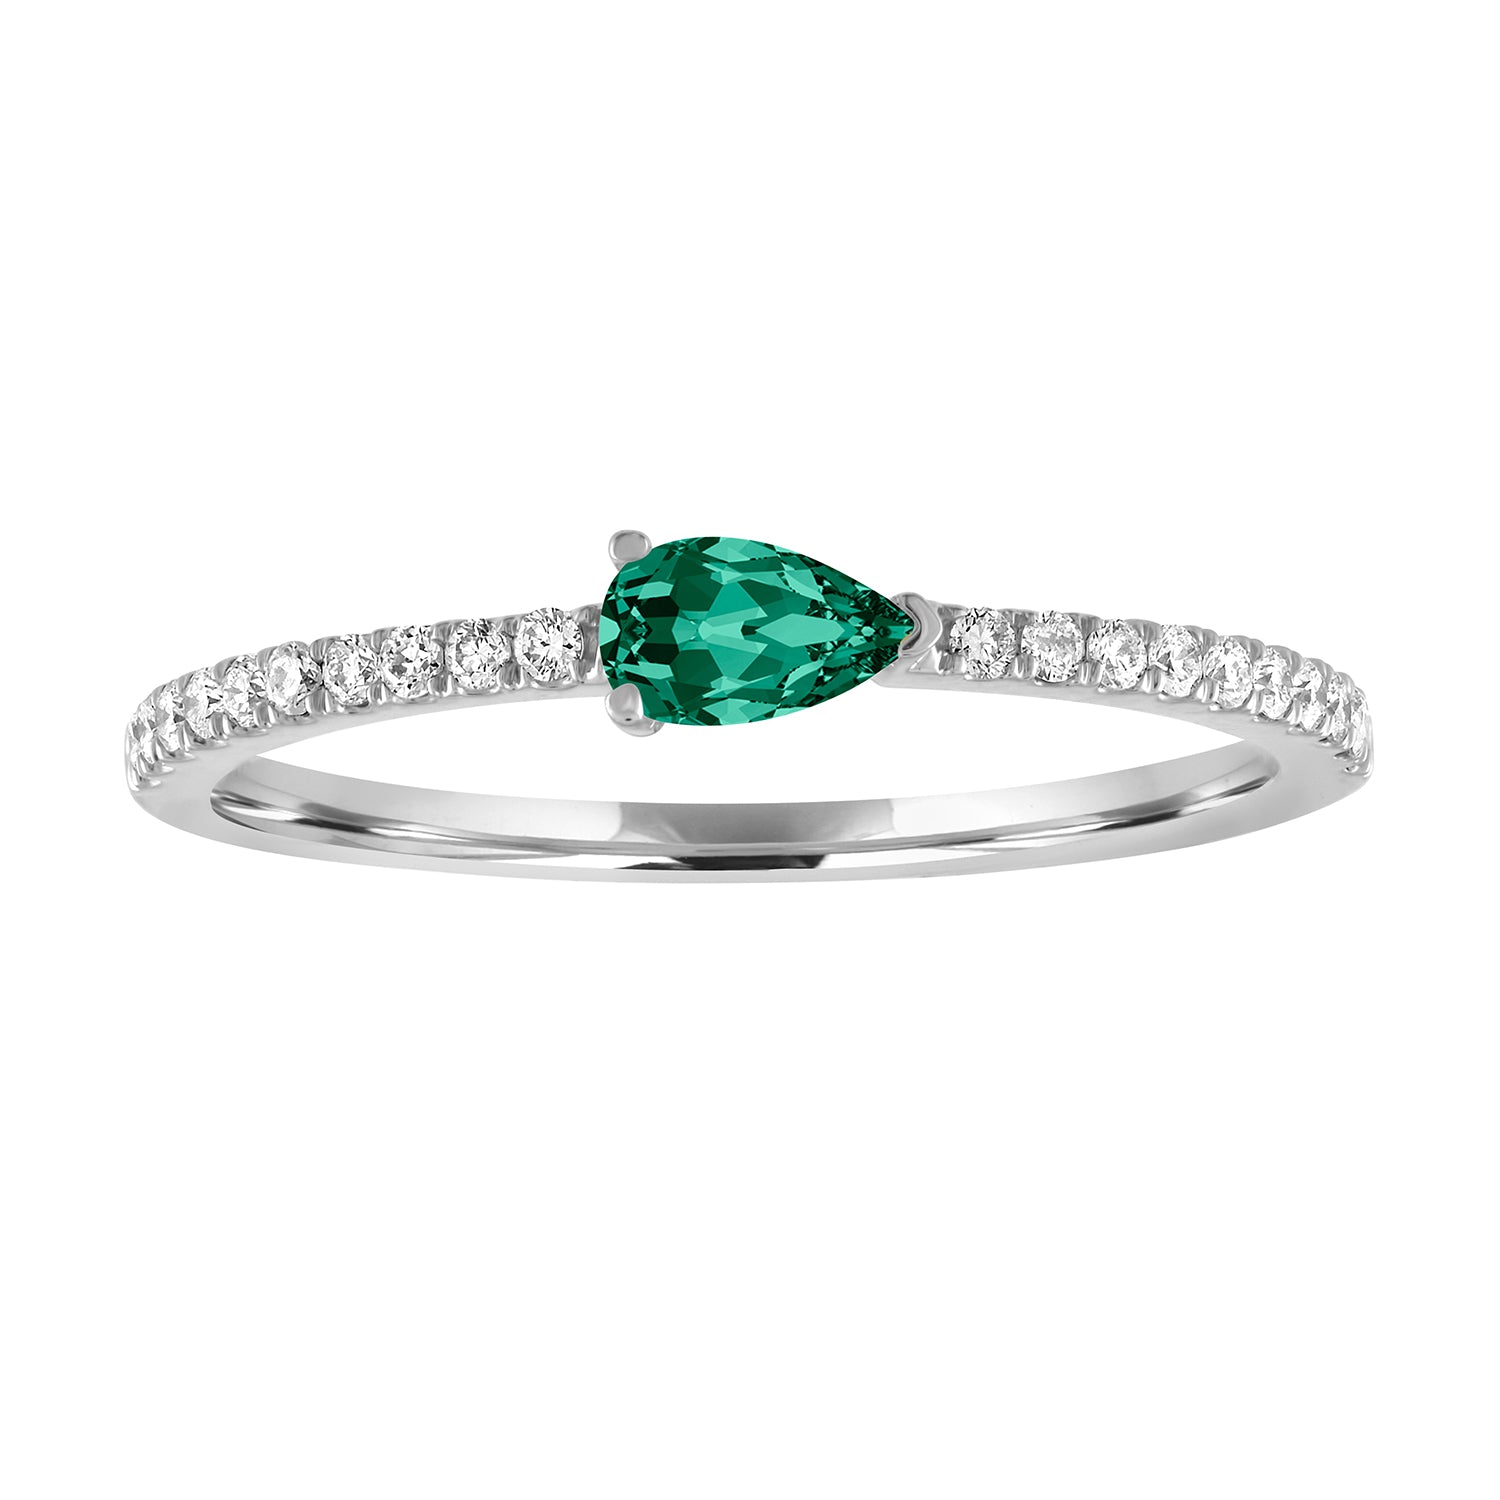 White gold skinny band with a pear shaped emerald in the center and round diamonds on the shank. 